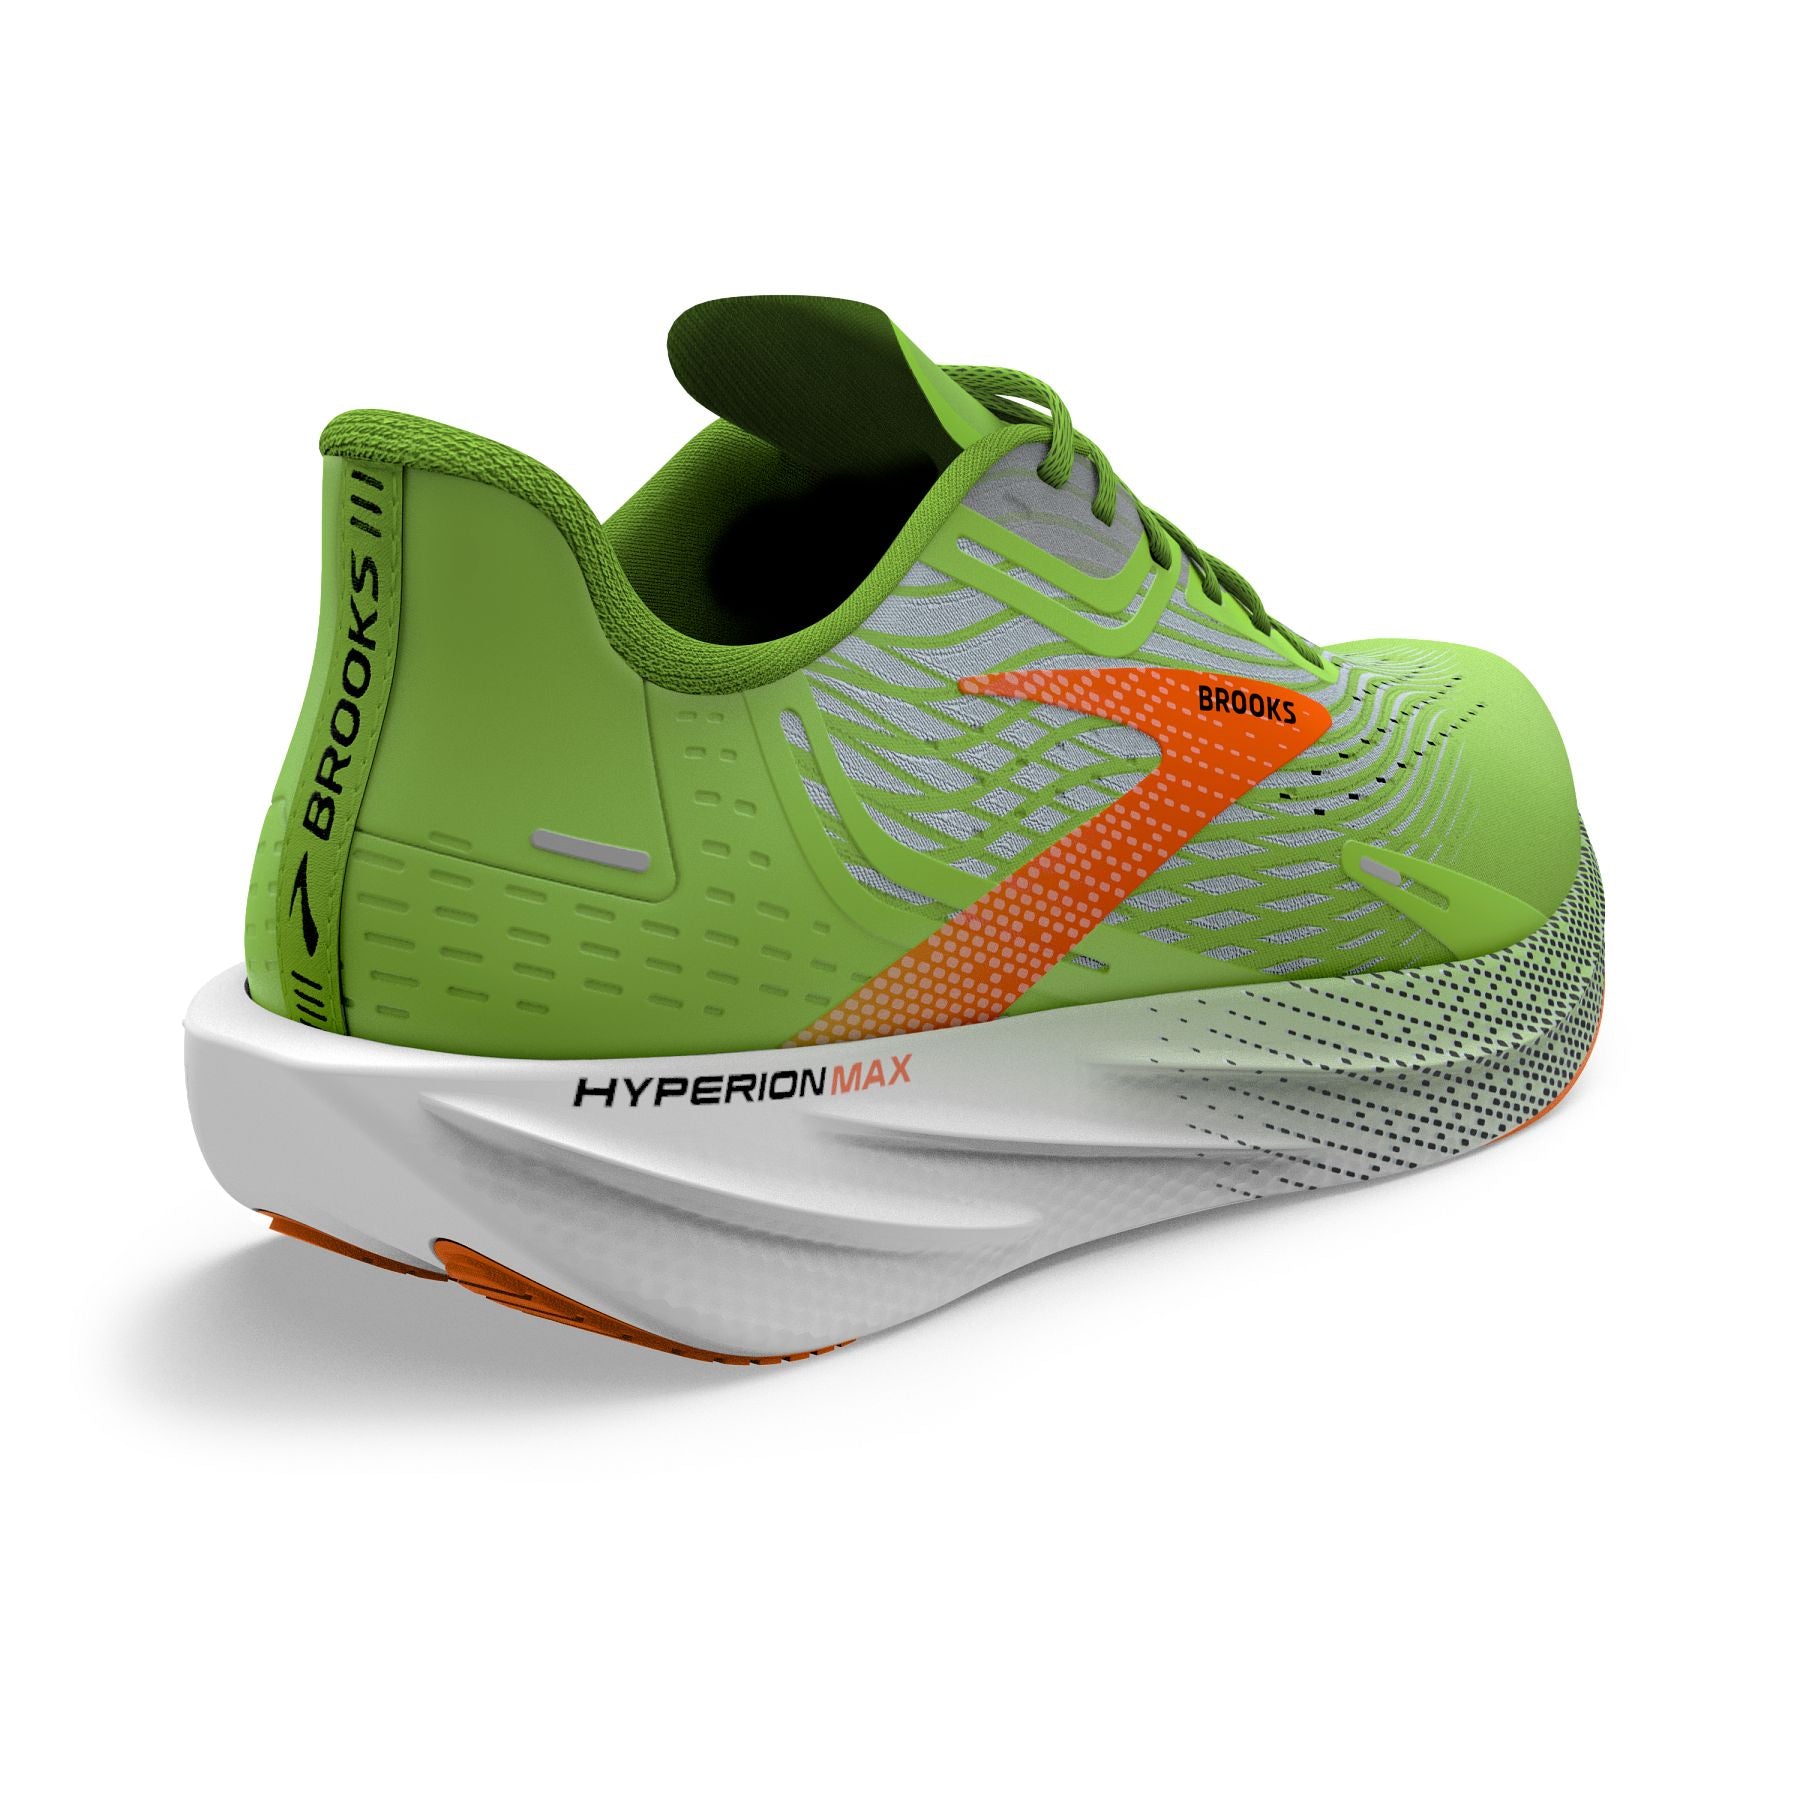 Back angle view of the Men's Hyperion Max in Green Gecko/Red Orange/White